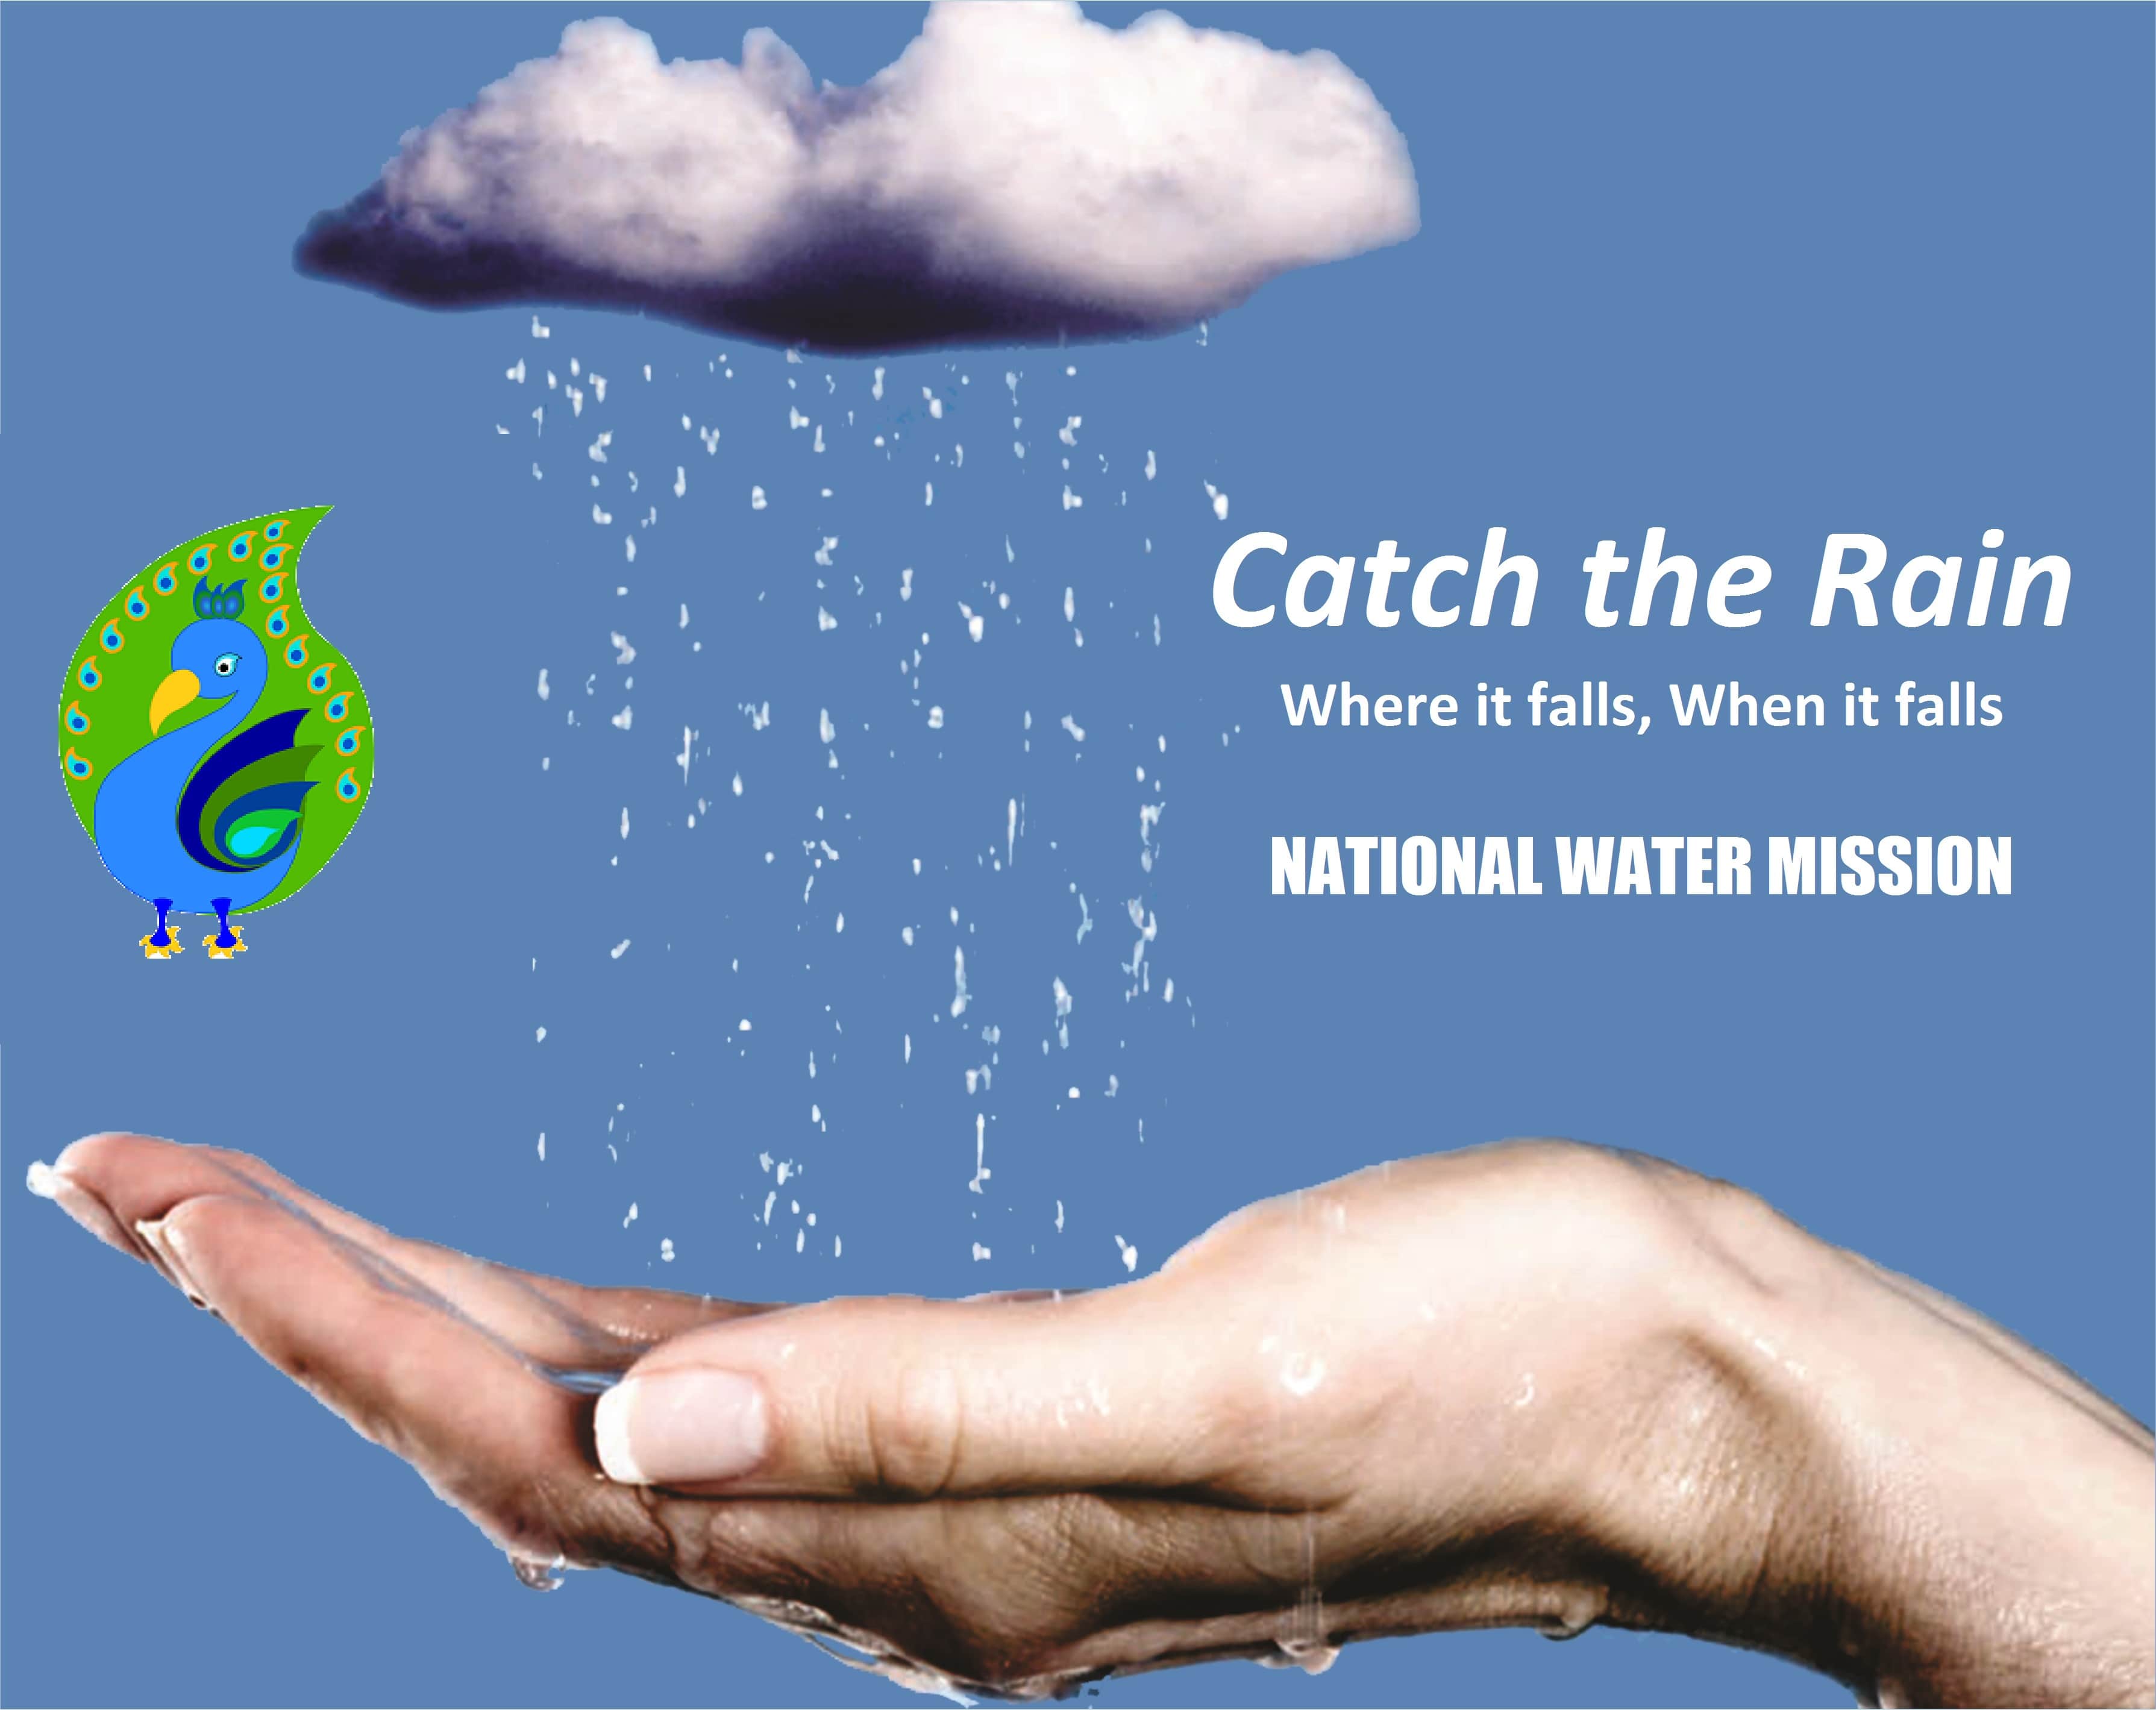 National water mission